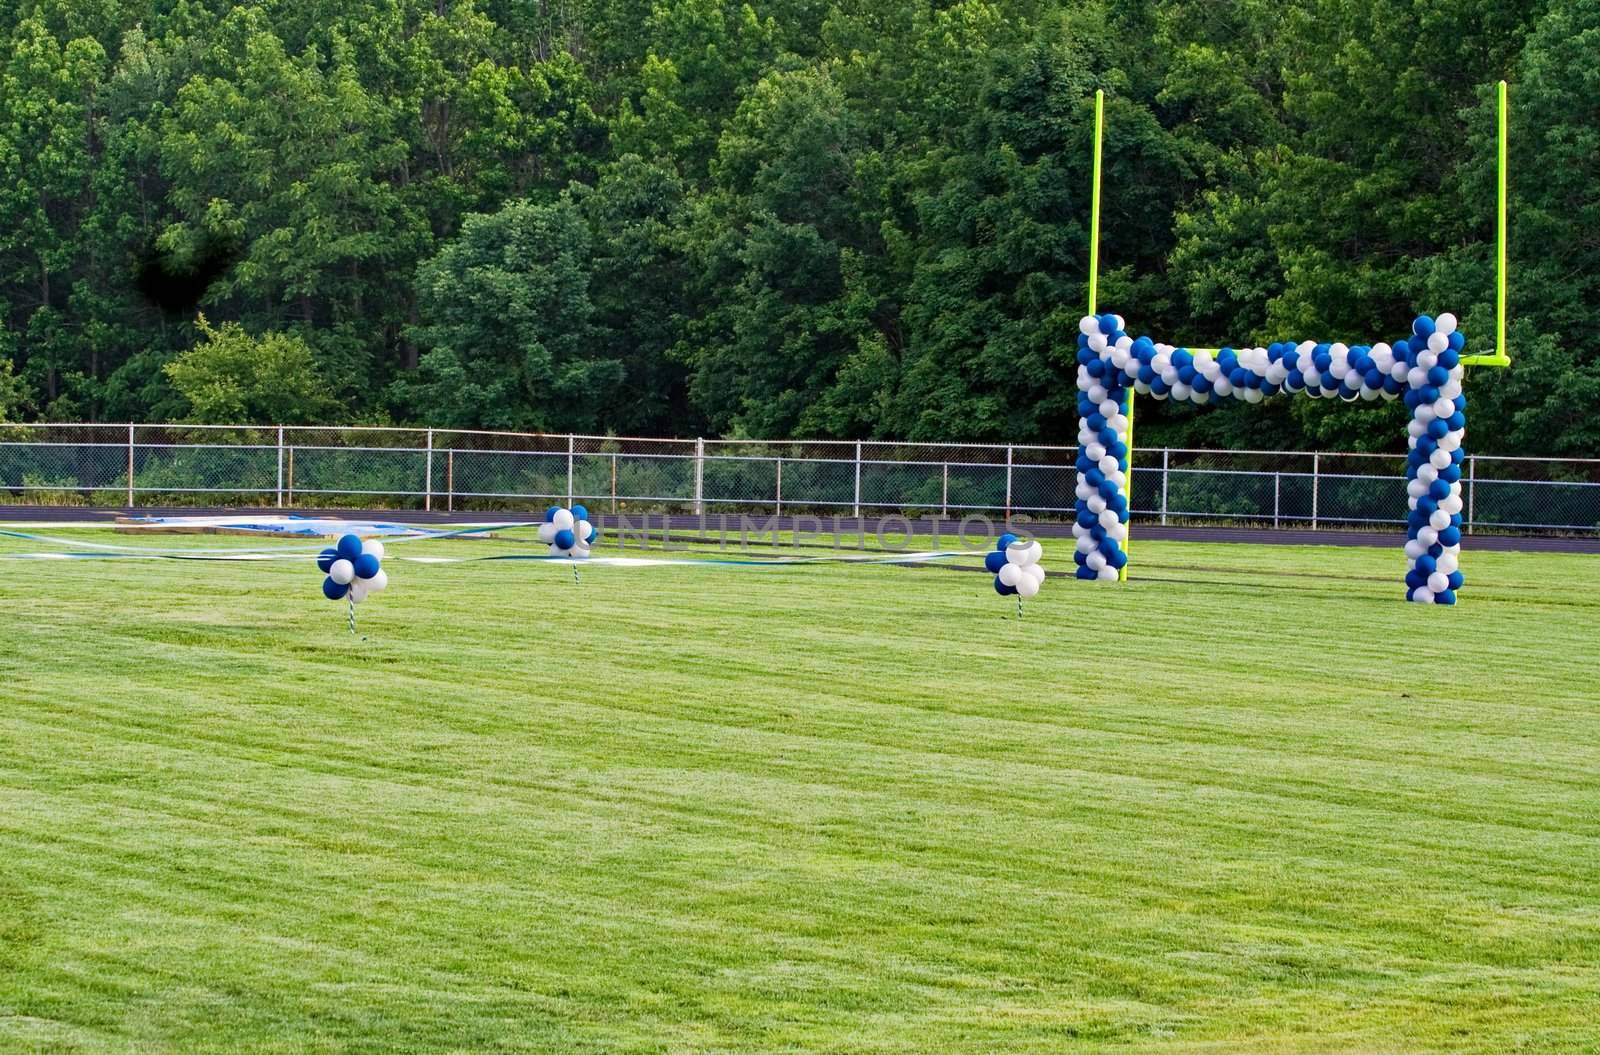 A High School football field with goal posts decorated with balloons. The field decorations are preparations for a graduation ceremony.